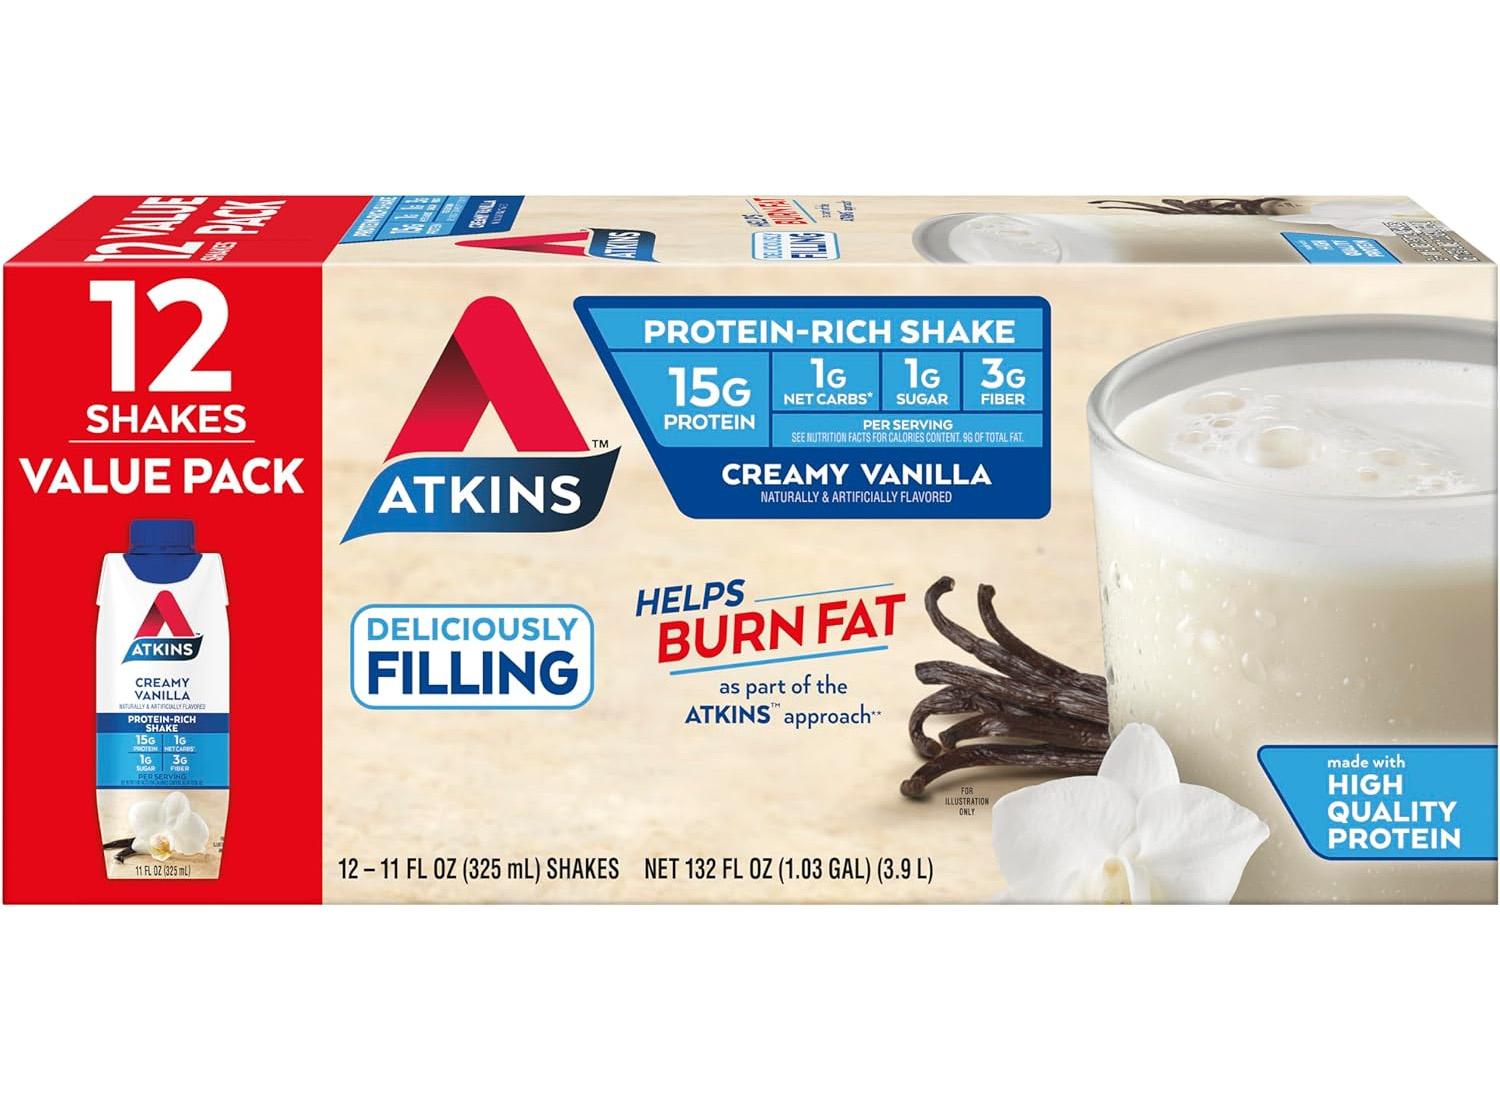 Atkins Protein-Rich Shakes 12 Pack for $13.28